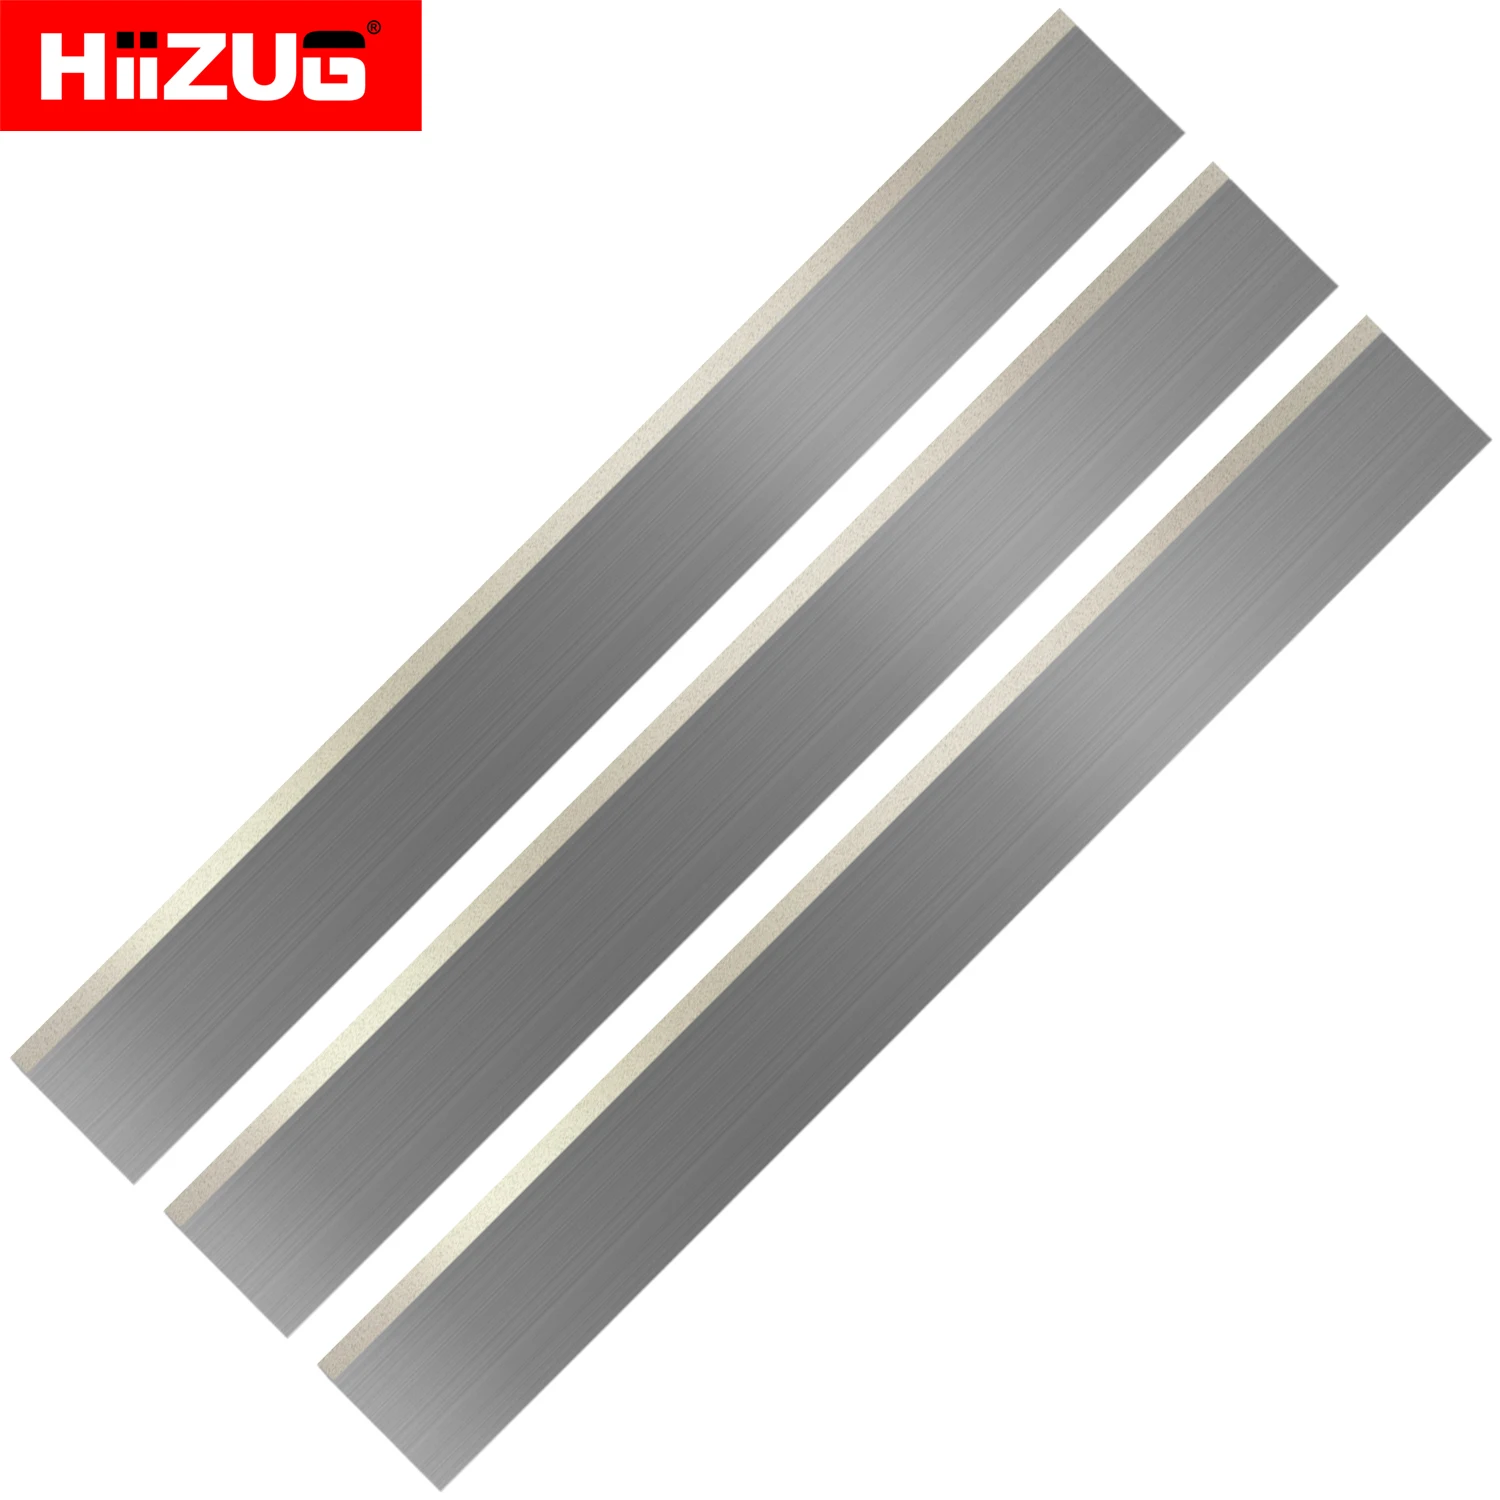 

11 Inch 280mm×40mm×3mm 3pcs Planer Blades Knives Cutter Head for Electric Surface Thicknesser Planer Jointer Machines HSS TCT